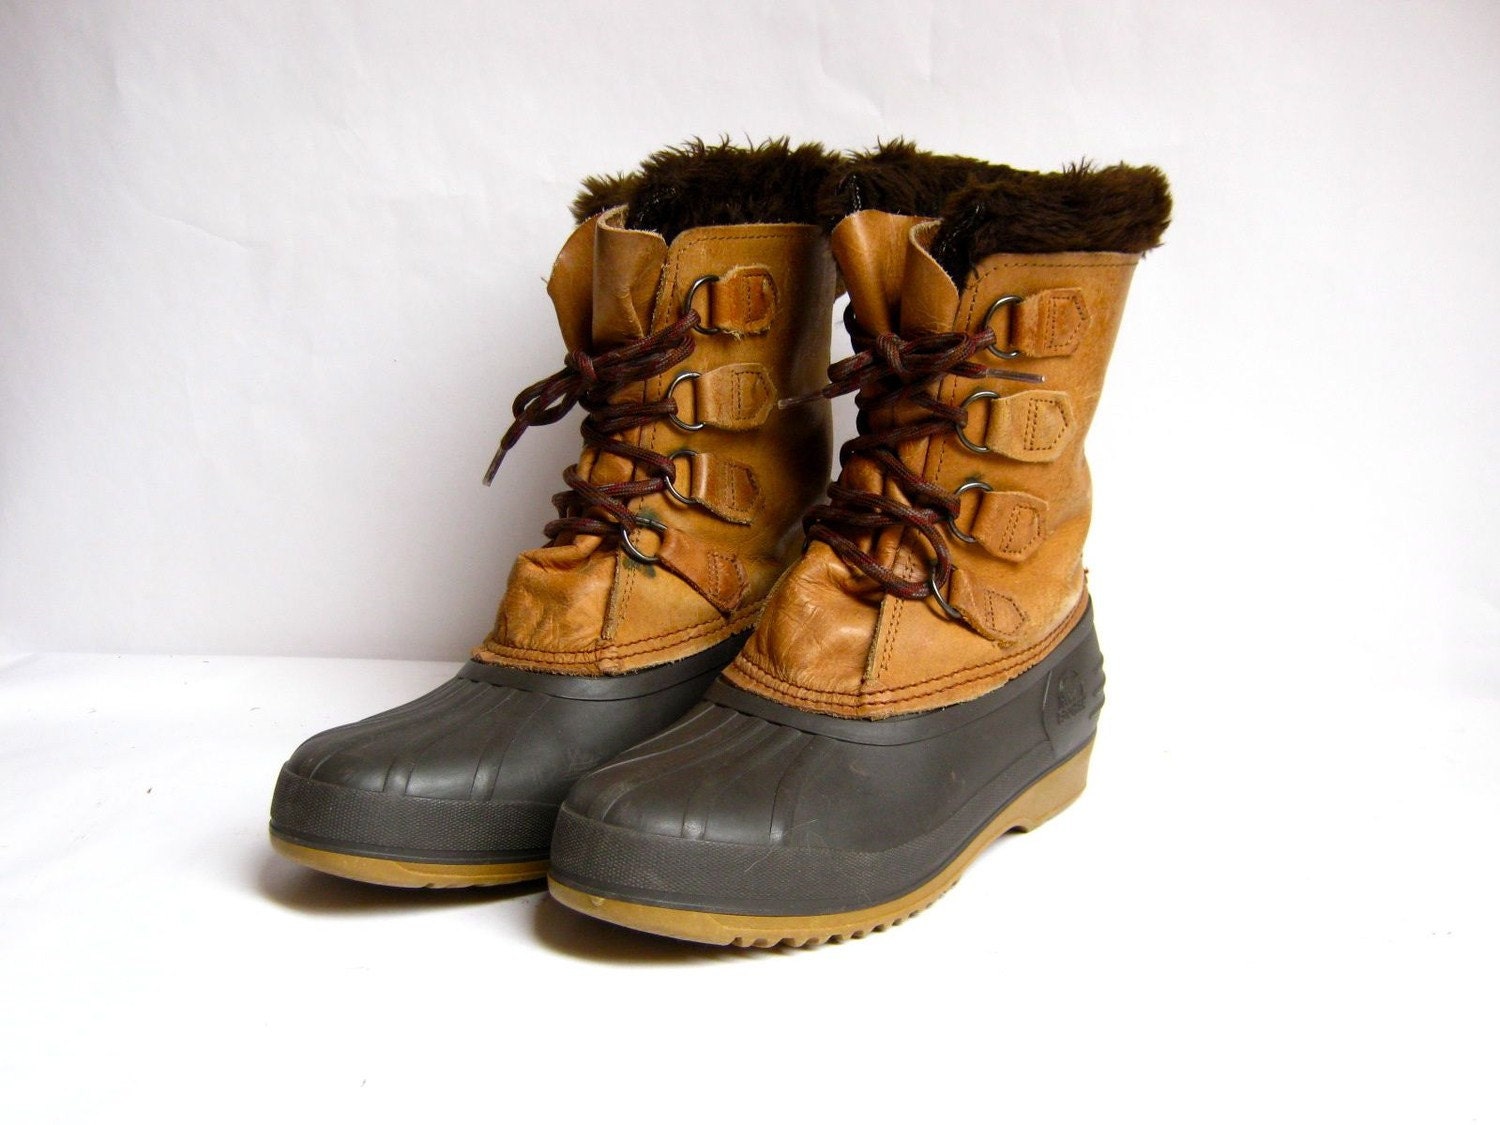 Brown leather and rubber SOREL snow boots 9 by dirtybirdiesvintage